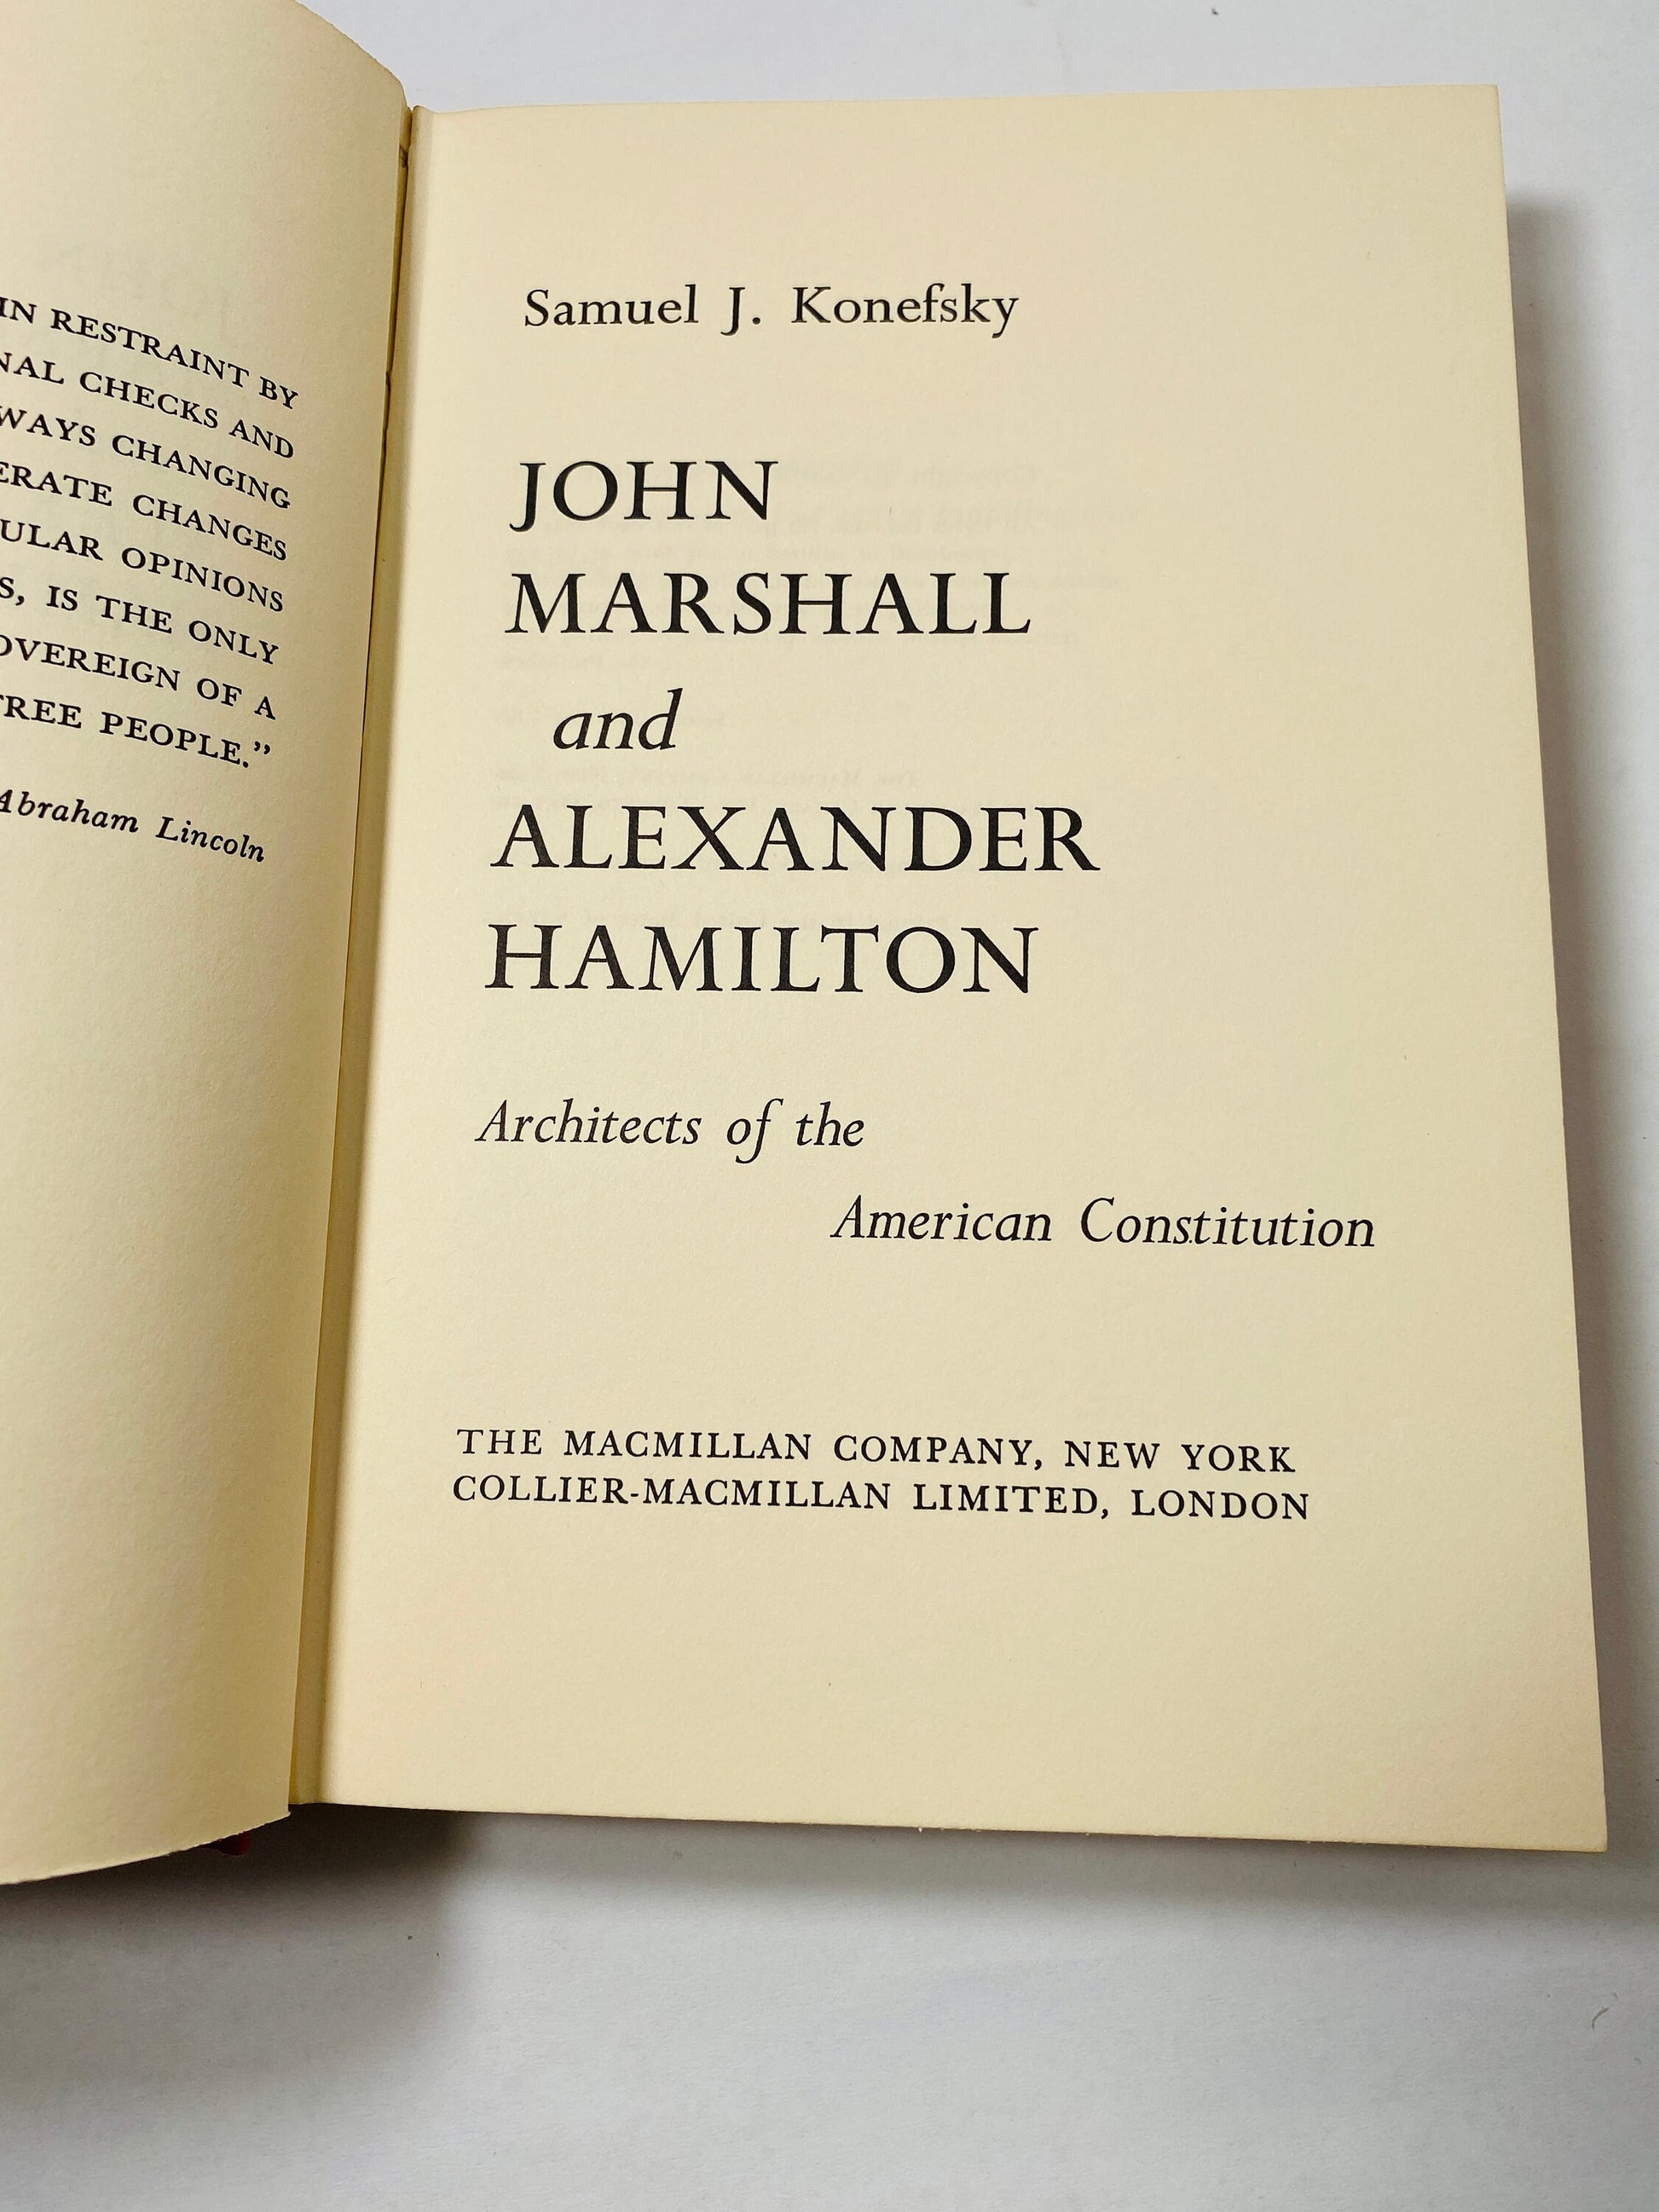 John Marshall and Alexander Hamilton FIRST EDITION vintage book about the American Constitution by Samuel Konefsky circa 1972 history gift